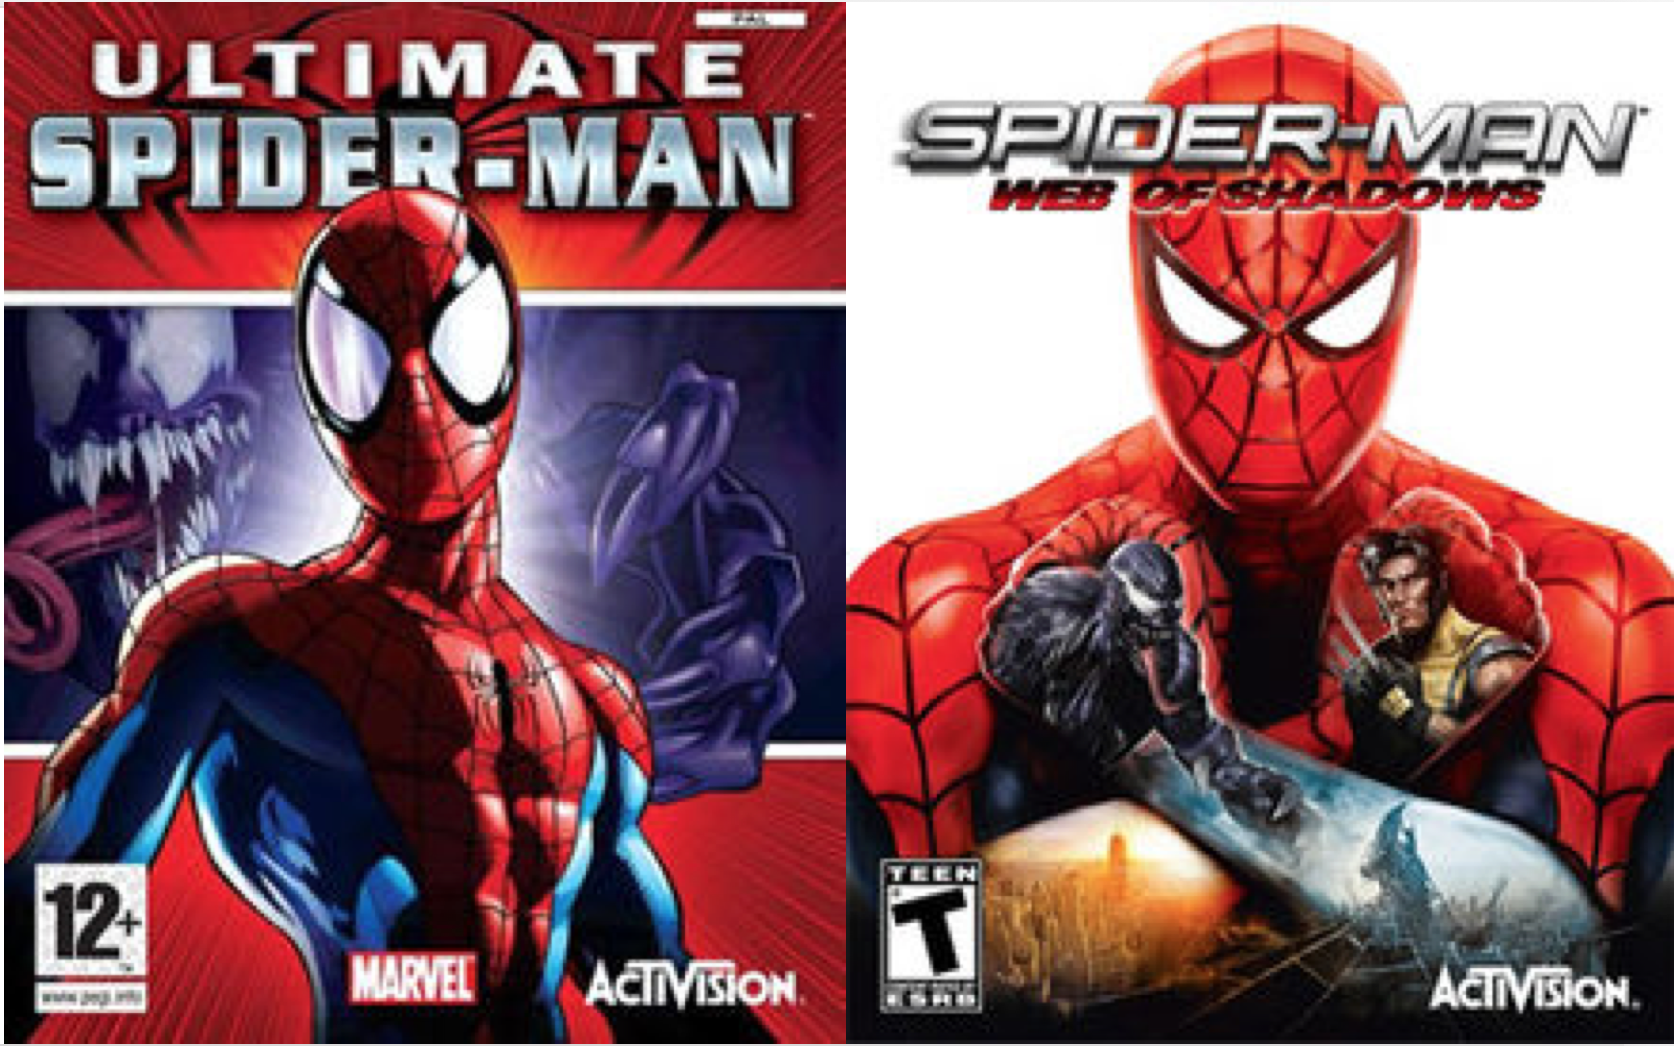 pebermynte Læs Sammenligning A Spider-Man Games Retrospective Part 1: Ultimate Spider-Man and Web of  Shadows - Daily Superheroes - Your daily dose of Superheroes news